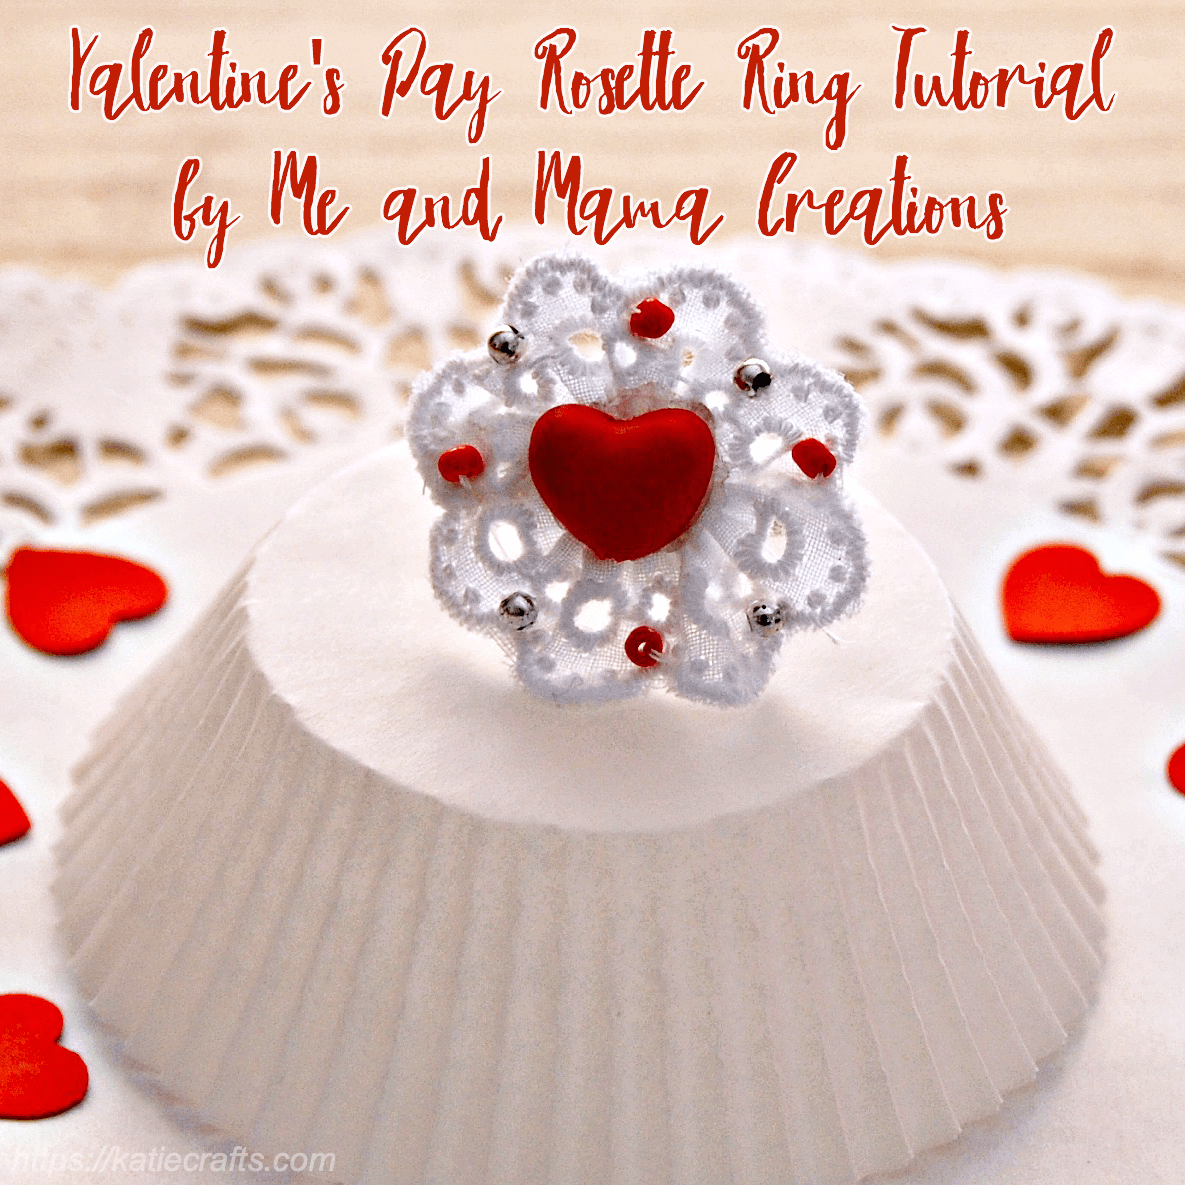 Valentine's Day Rosette Ring Tutorial by Me and Mama Creations